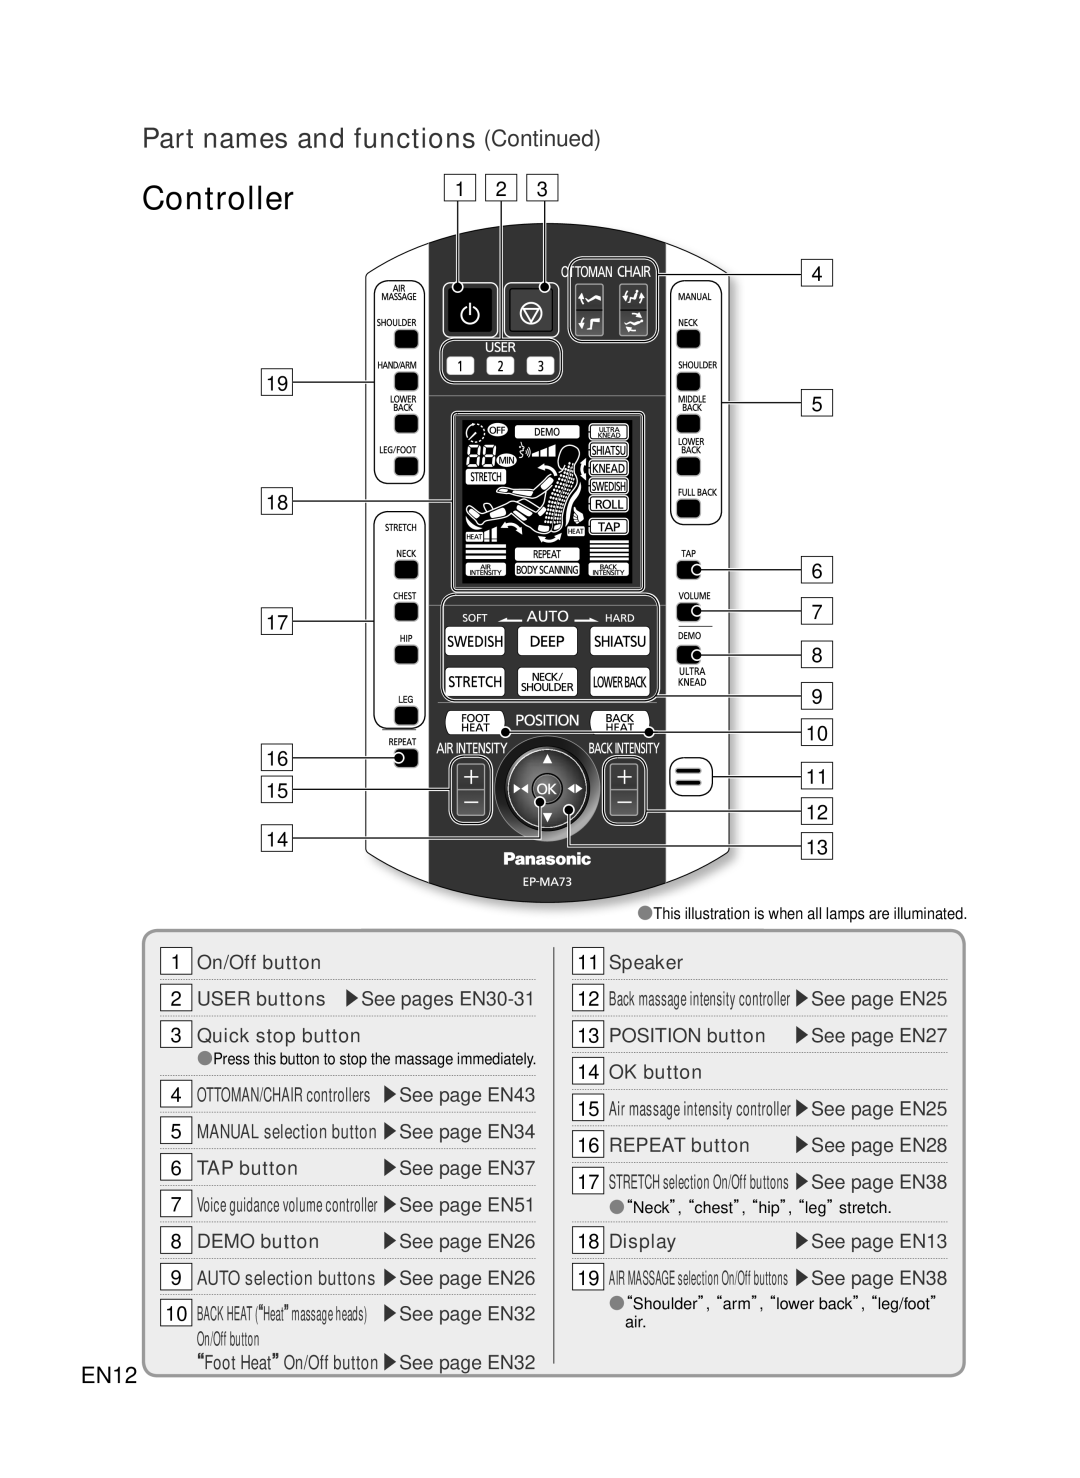 Panasonic EP-MA73 manual Controller, Part names and functions Continued, EN12, USER buttons See pages EN30-31 